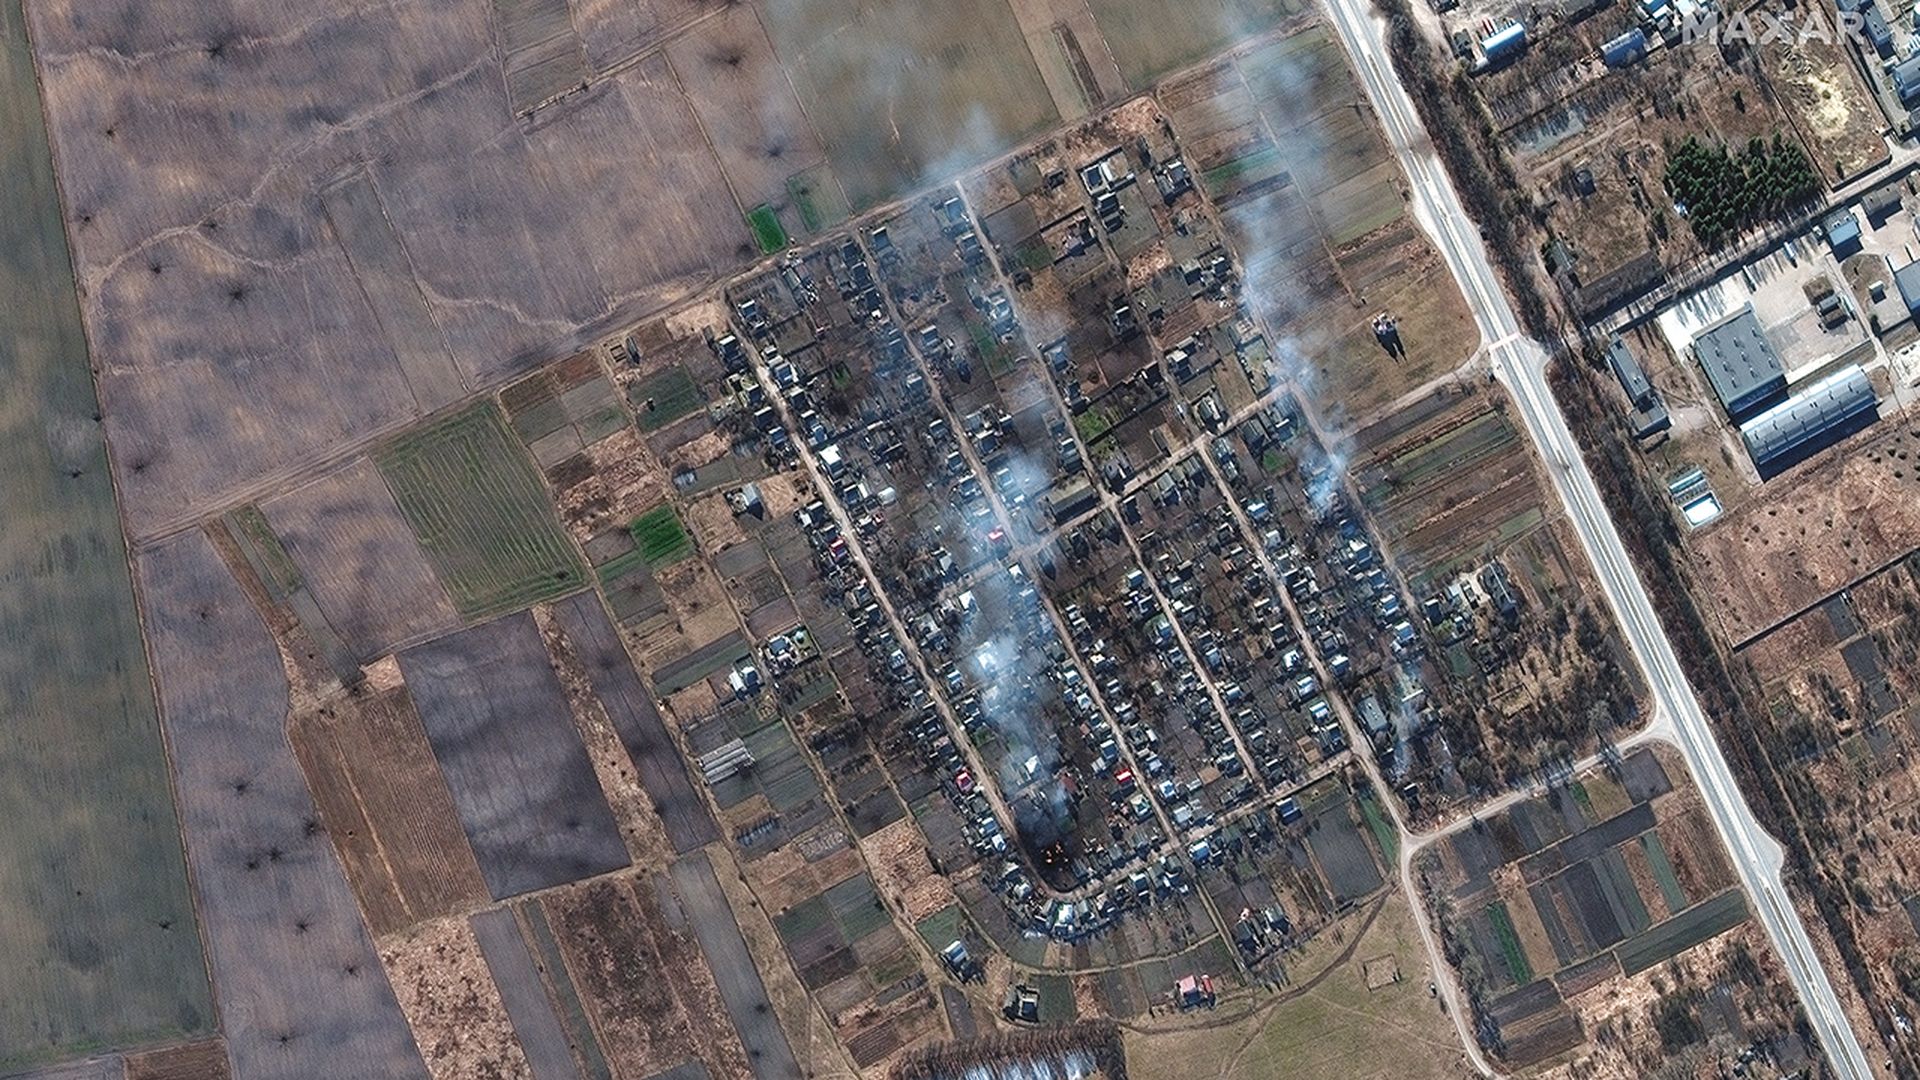 Satellite imagery of burning homes and impact craters in rural Ukraine. Photo: Maxar Technologies